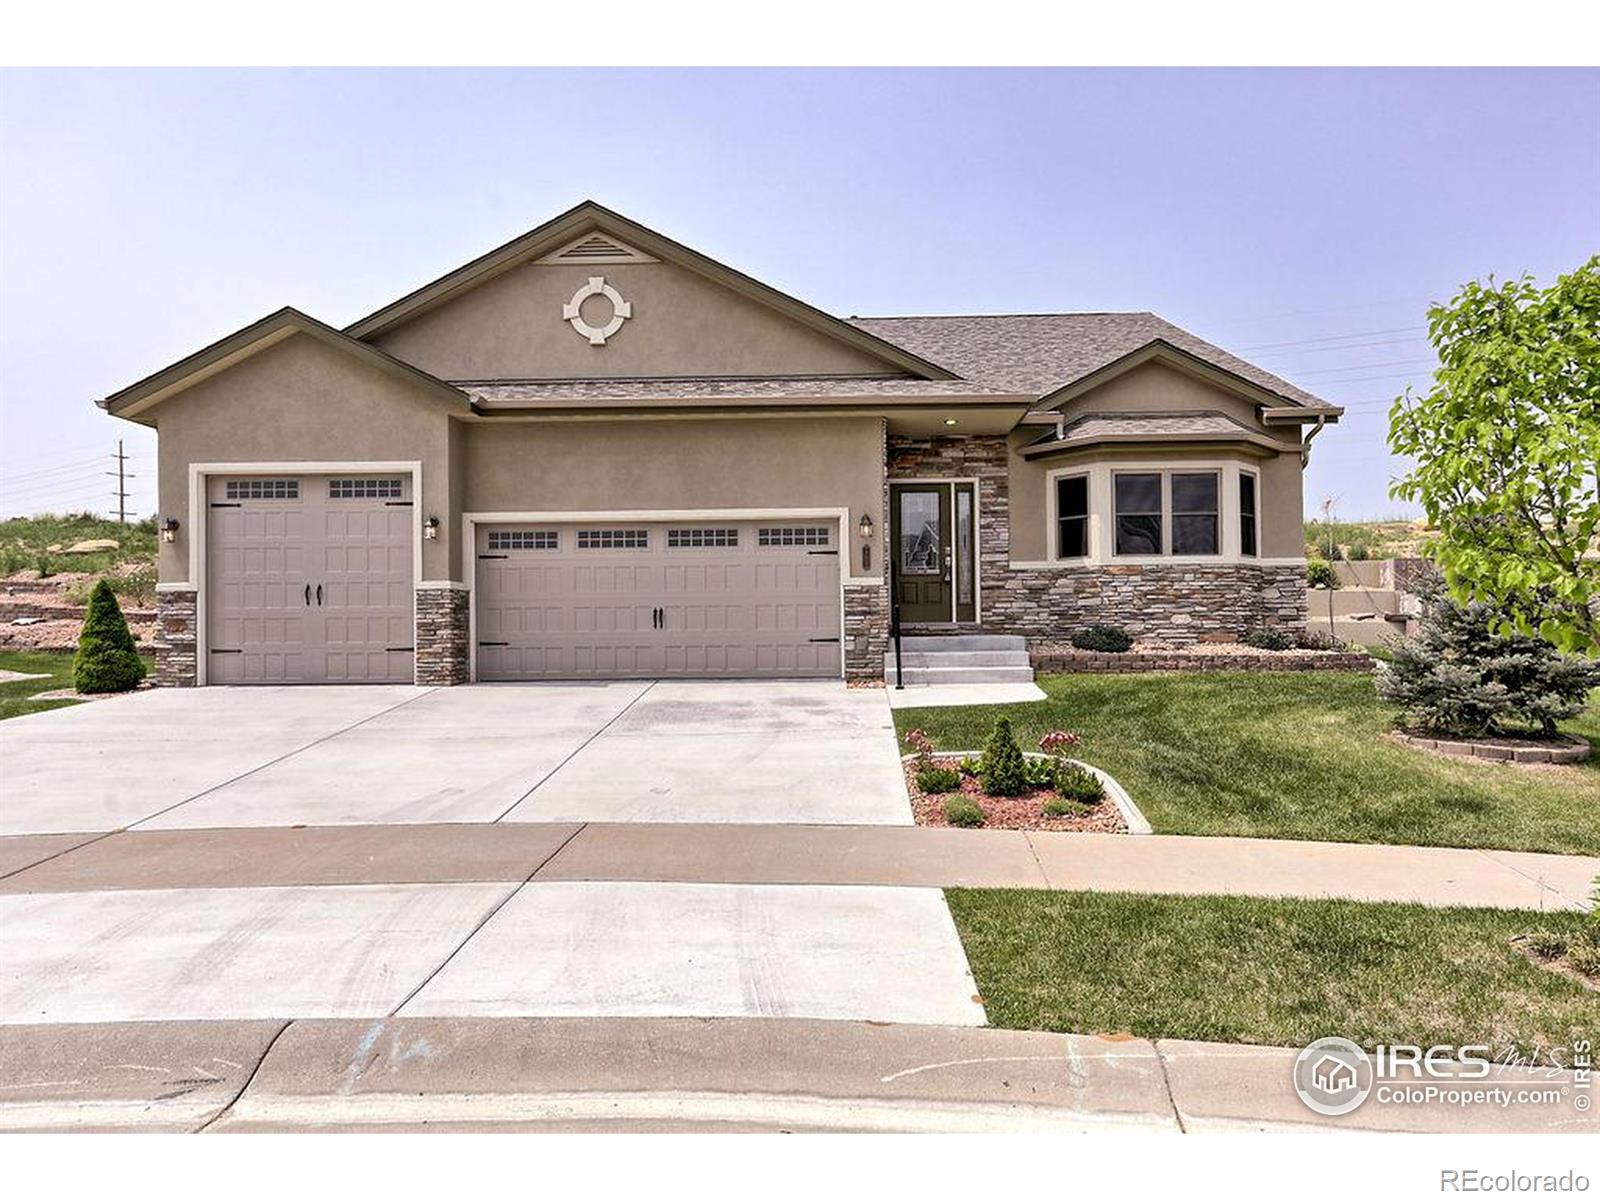 403  Double Tree Drive, greeley MLS: 123456789993200 Beds: 4 Baths: 4 Price: $630,000